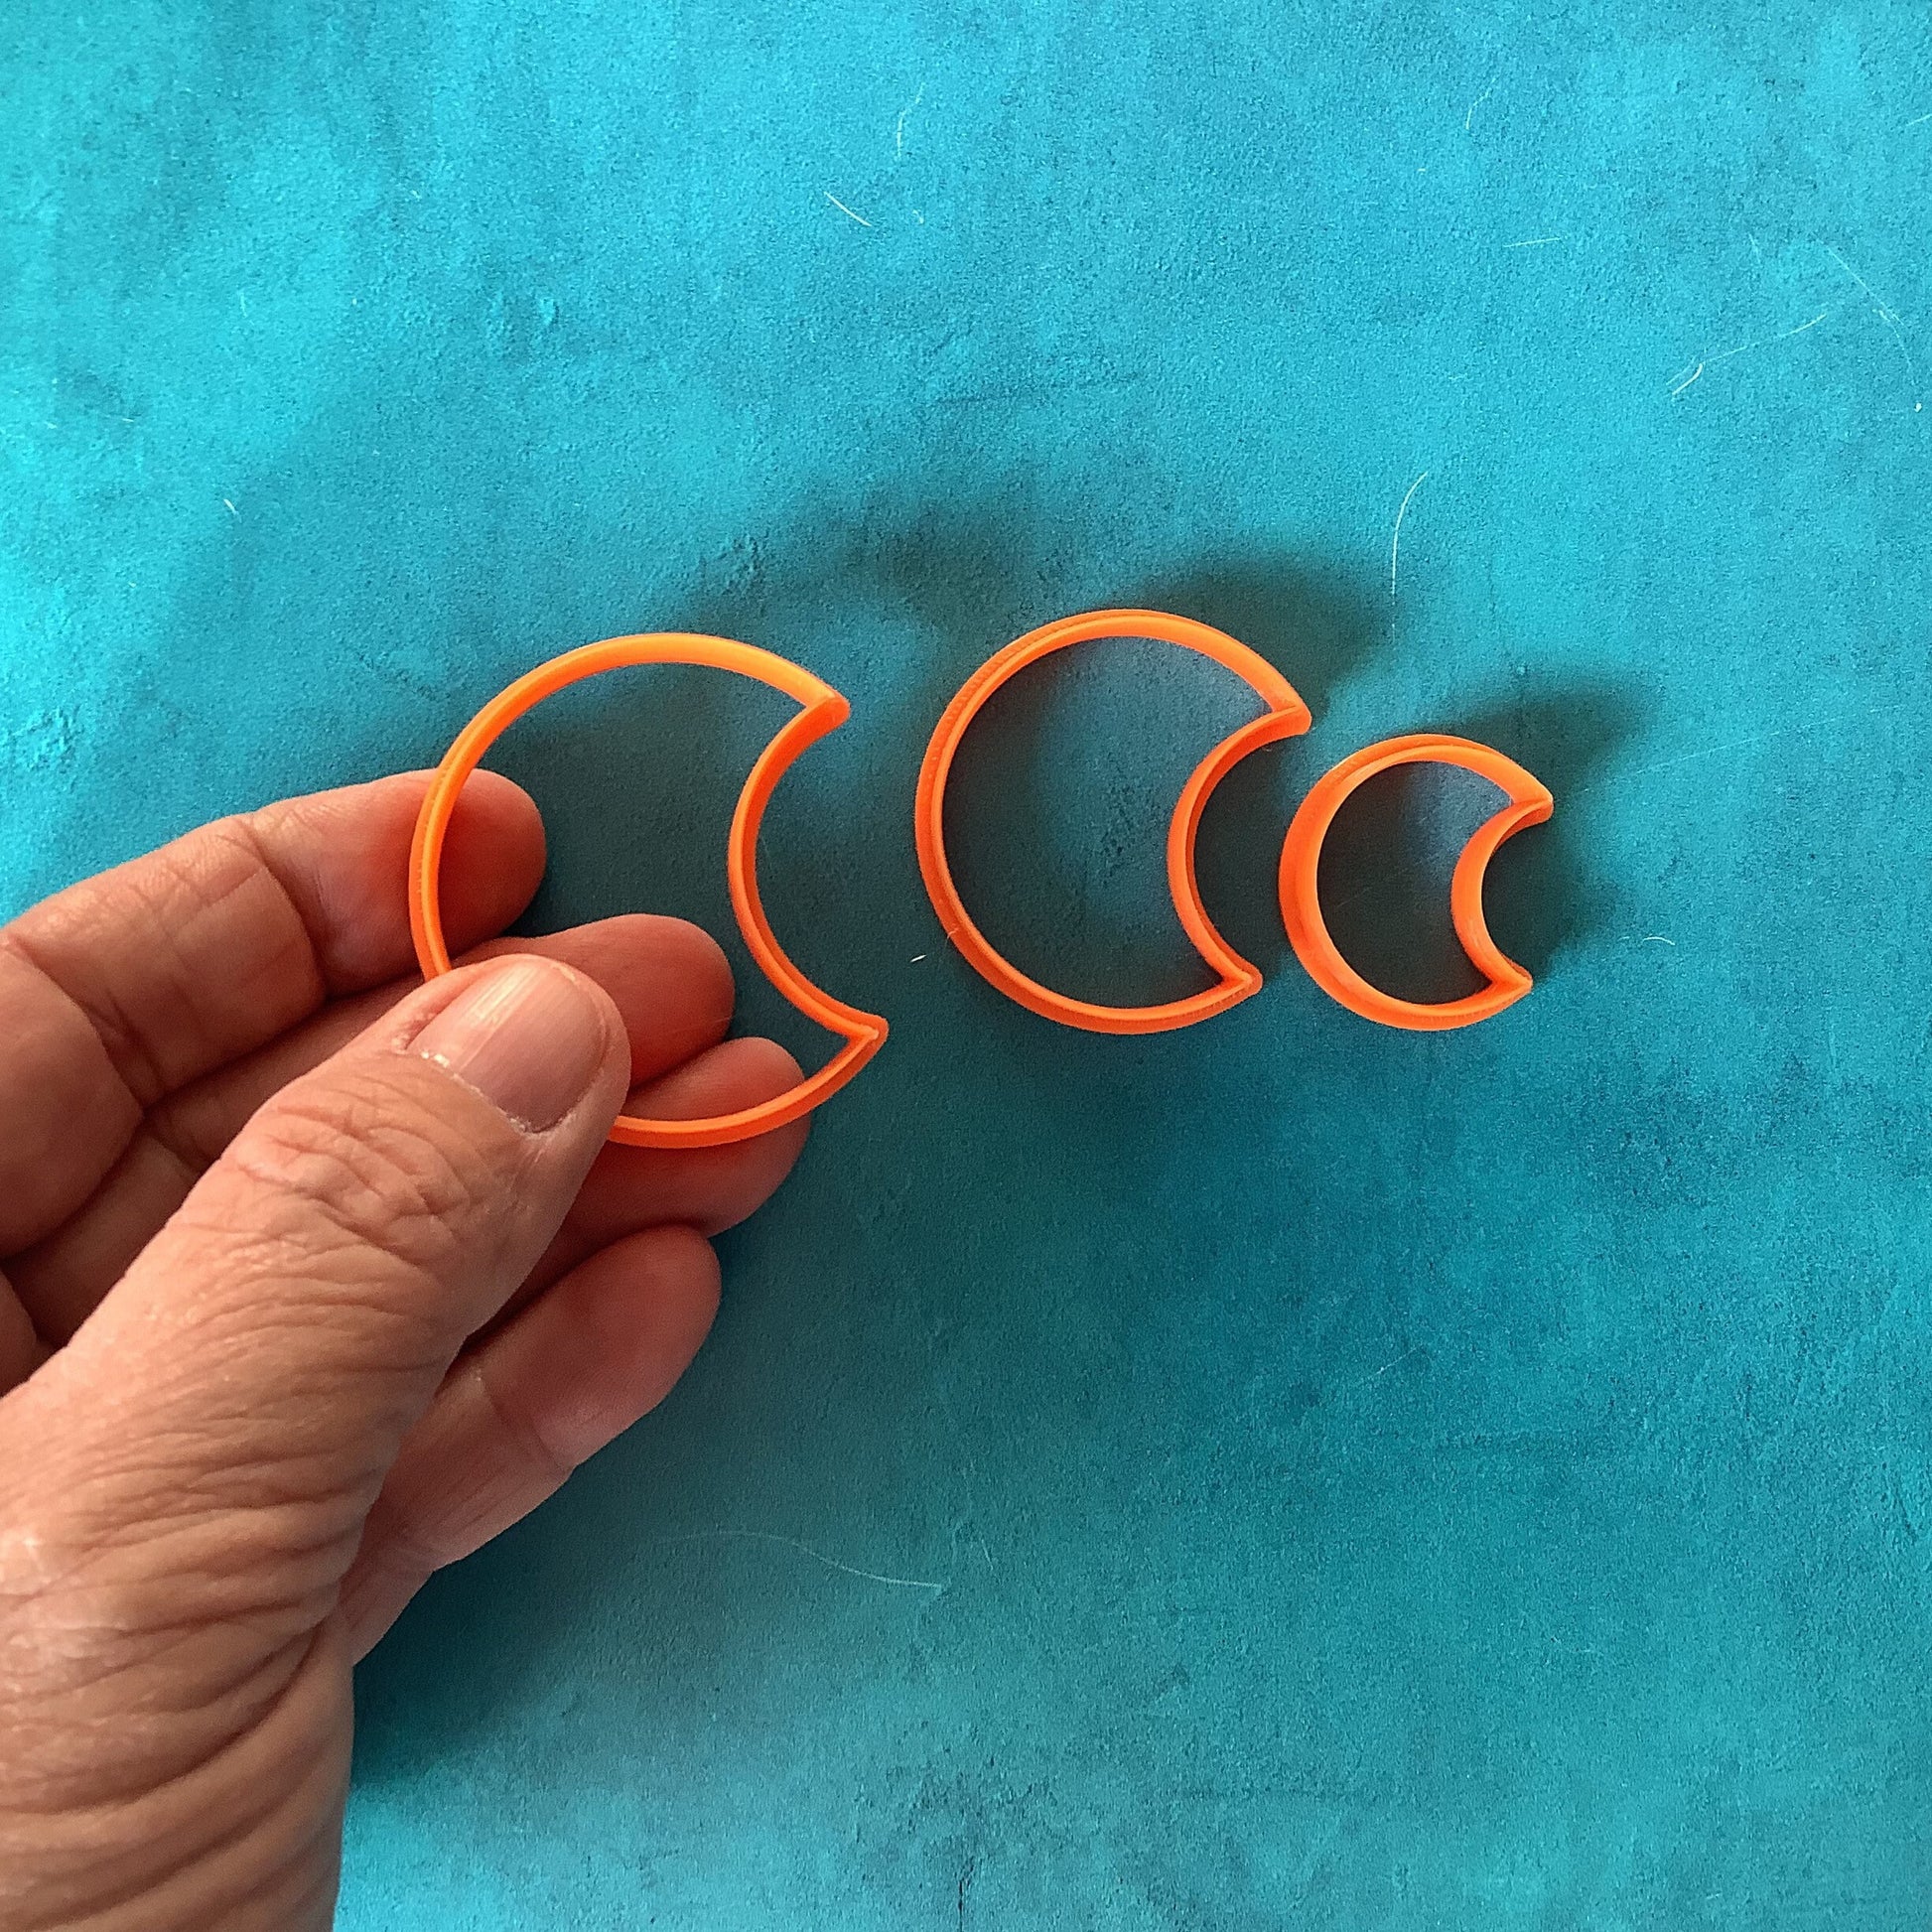 Waxing Moon Jewelry Sized set of 3 Cutters for Polymer Clay and Mixed Media DIY